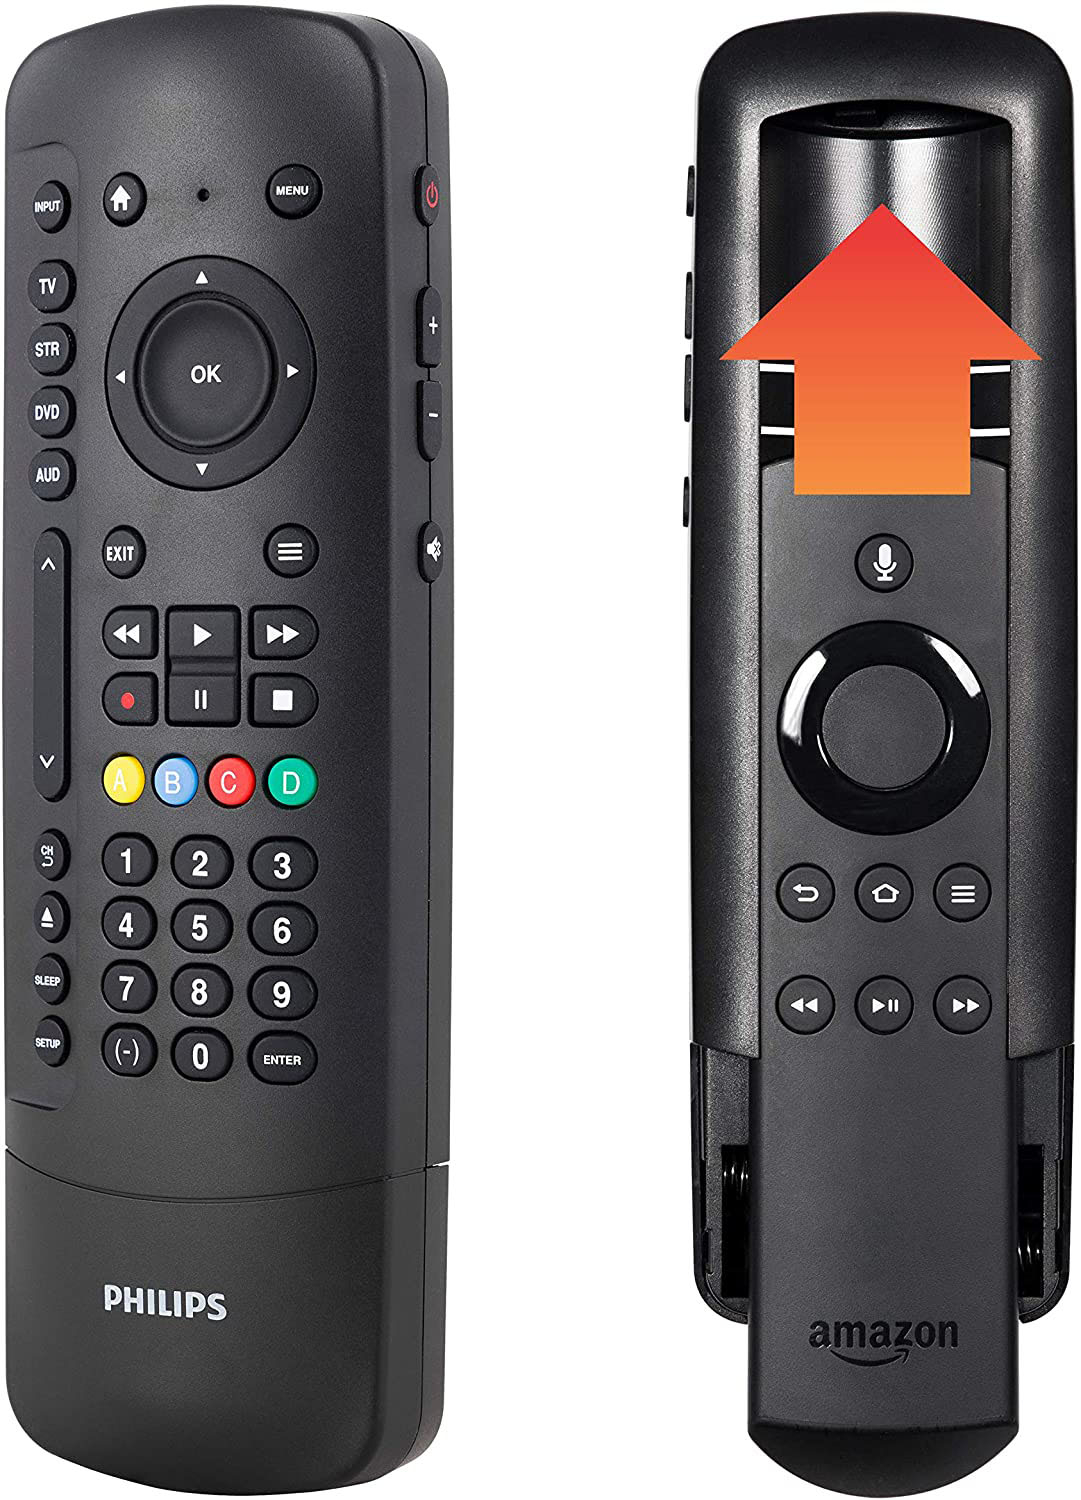 Fire TV Stick Lite with 2-Year Protection Plan